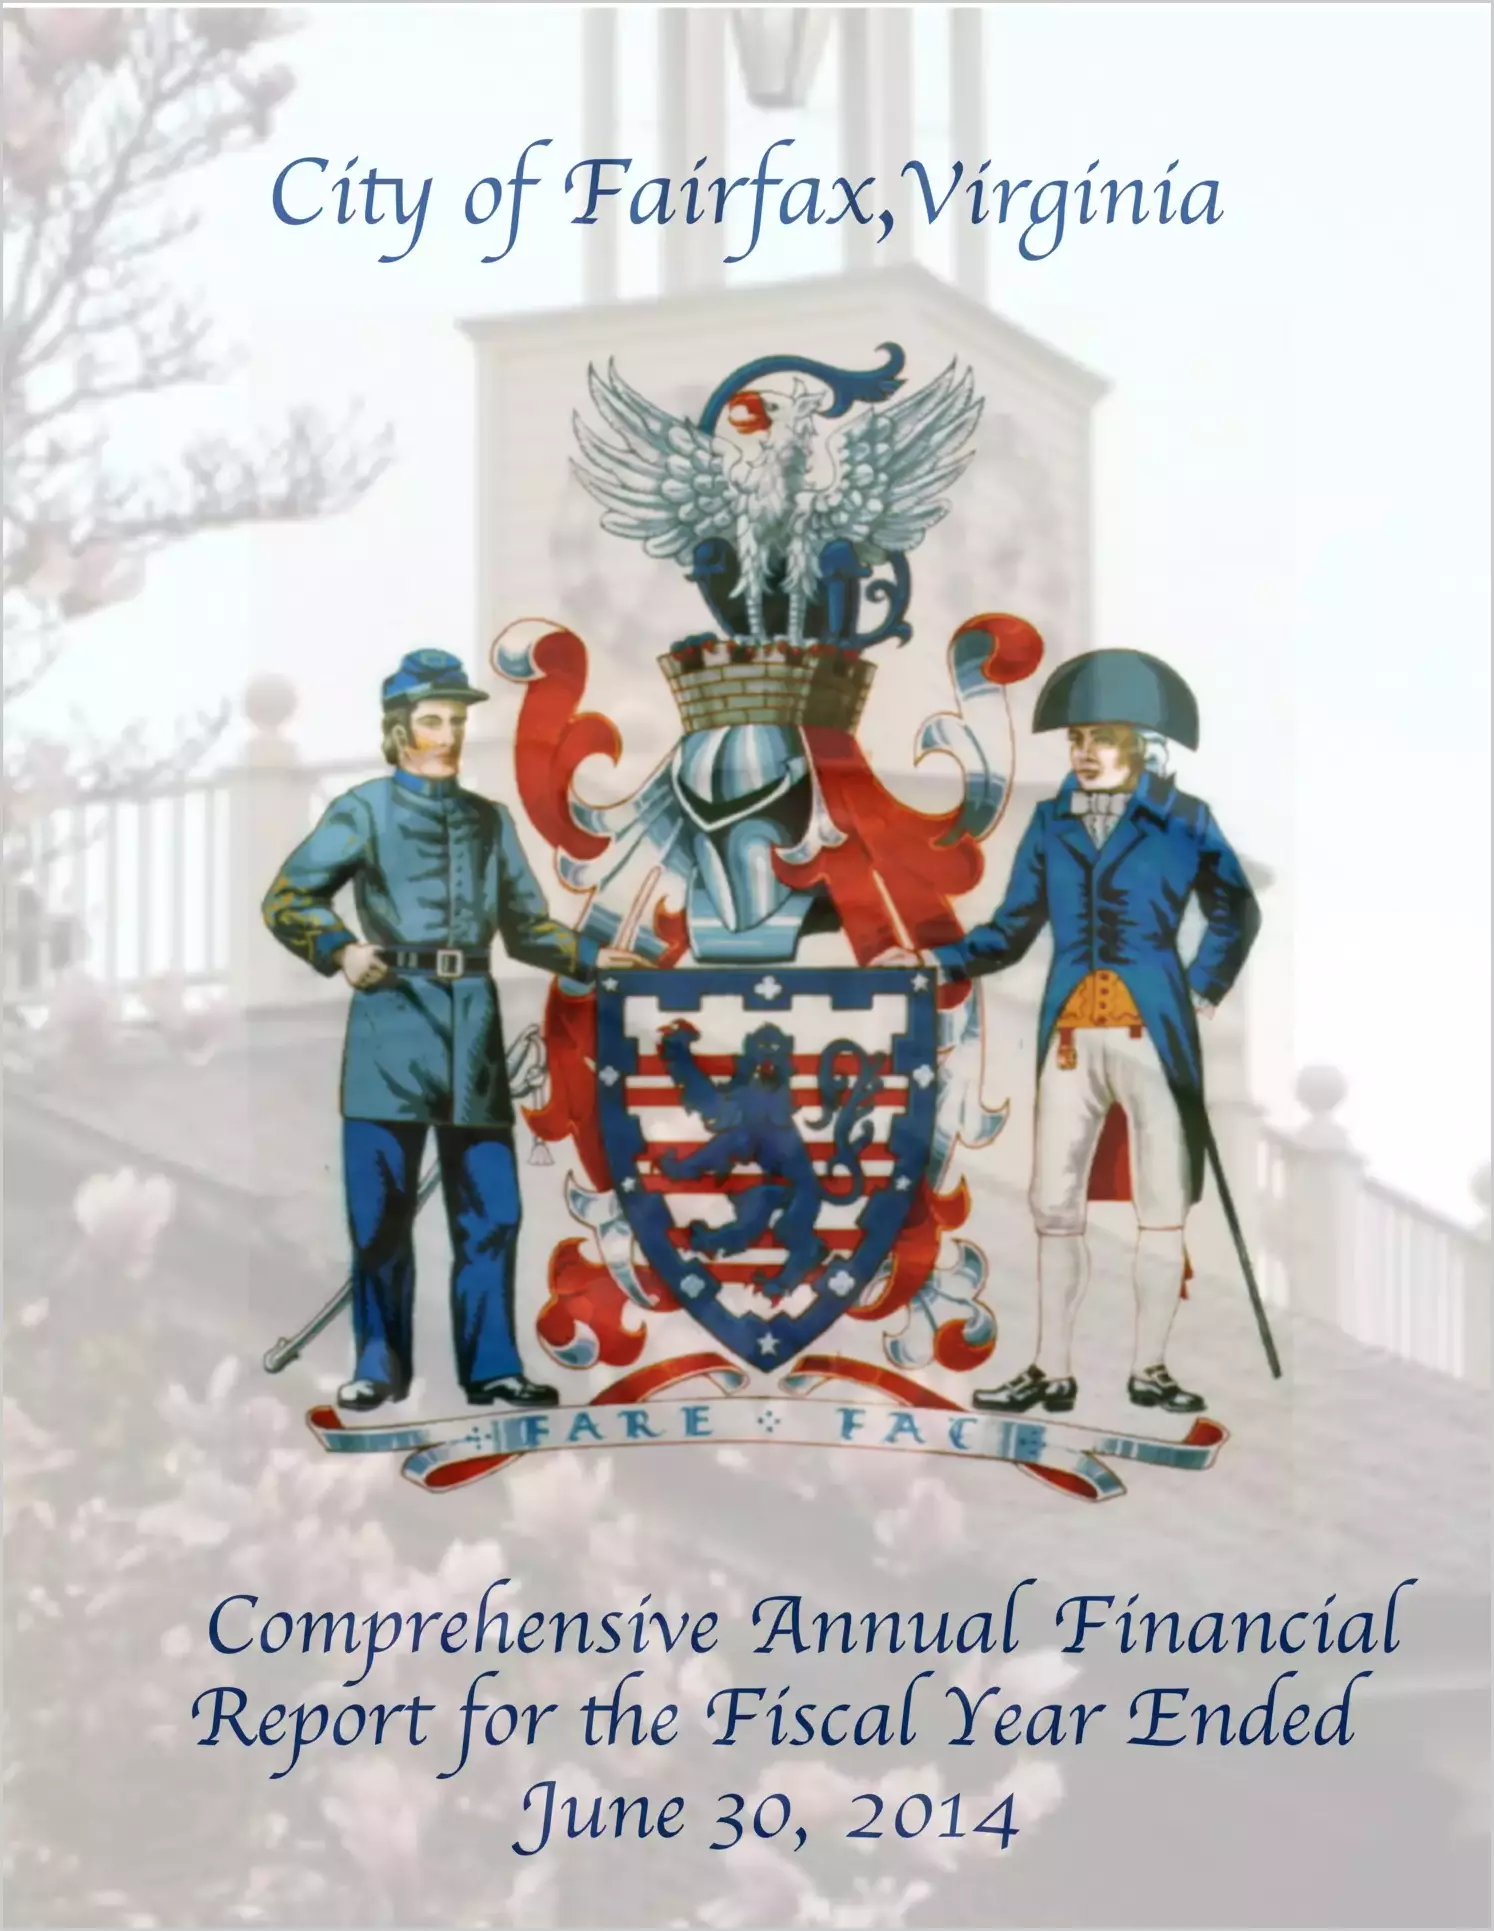 2014 Annual Financial Report for City of Fairfax